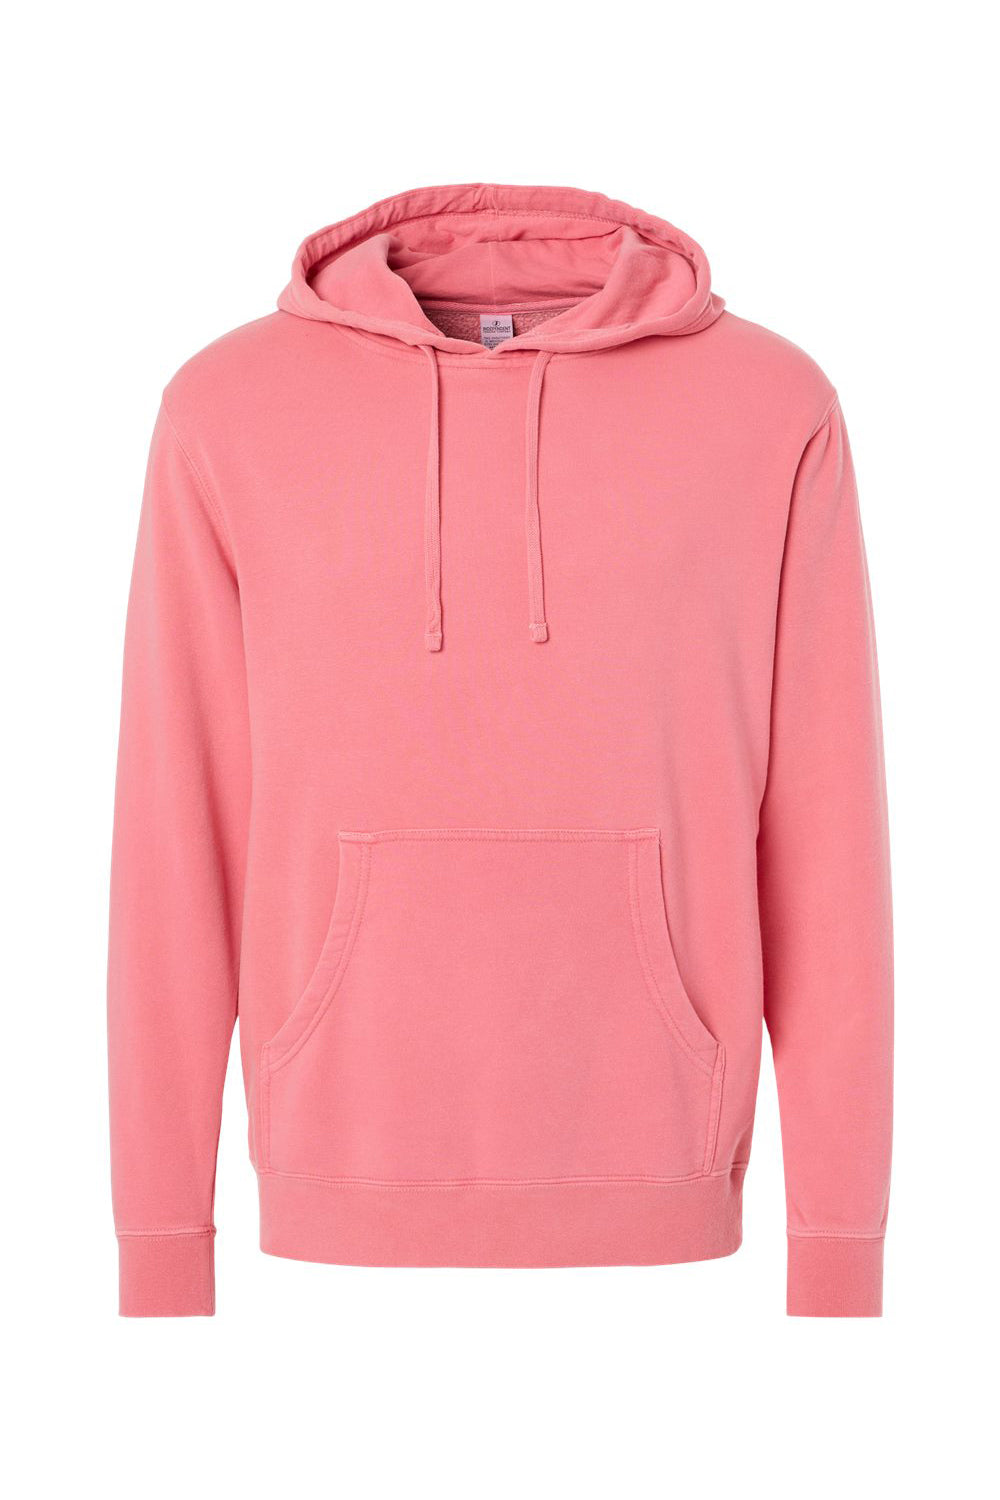 Independent Trading Co. PRM4500 Mens Pigment Dyed Hooded Sweatshirt Hoodie Pink Flat Front